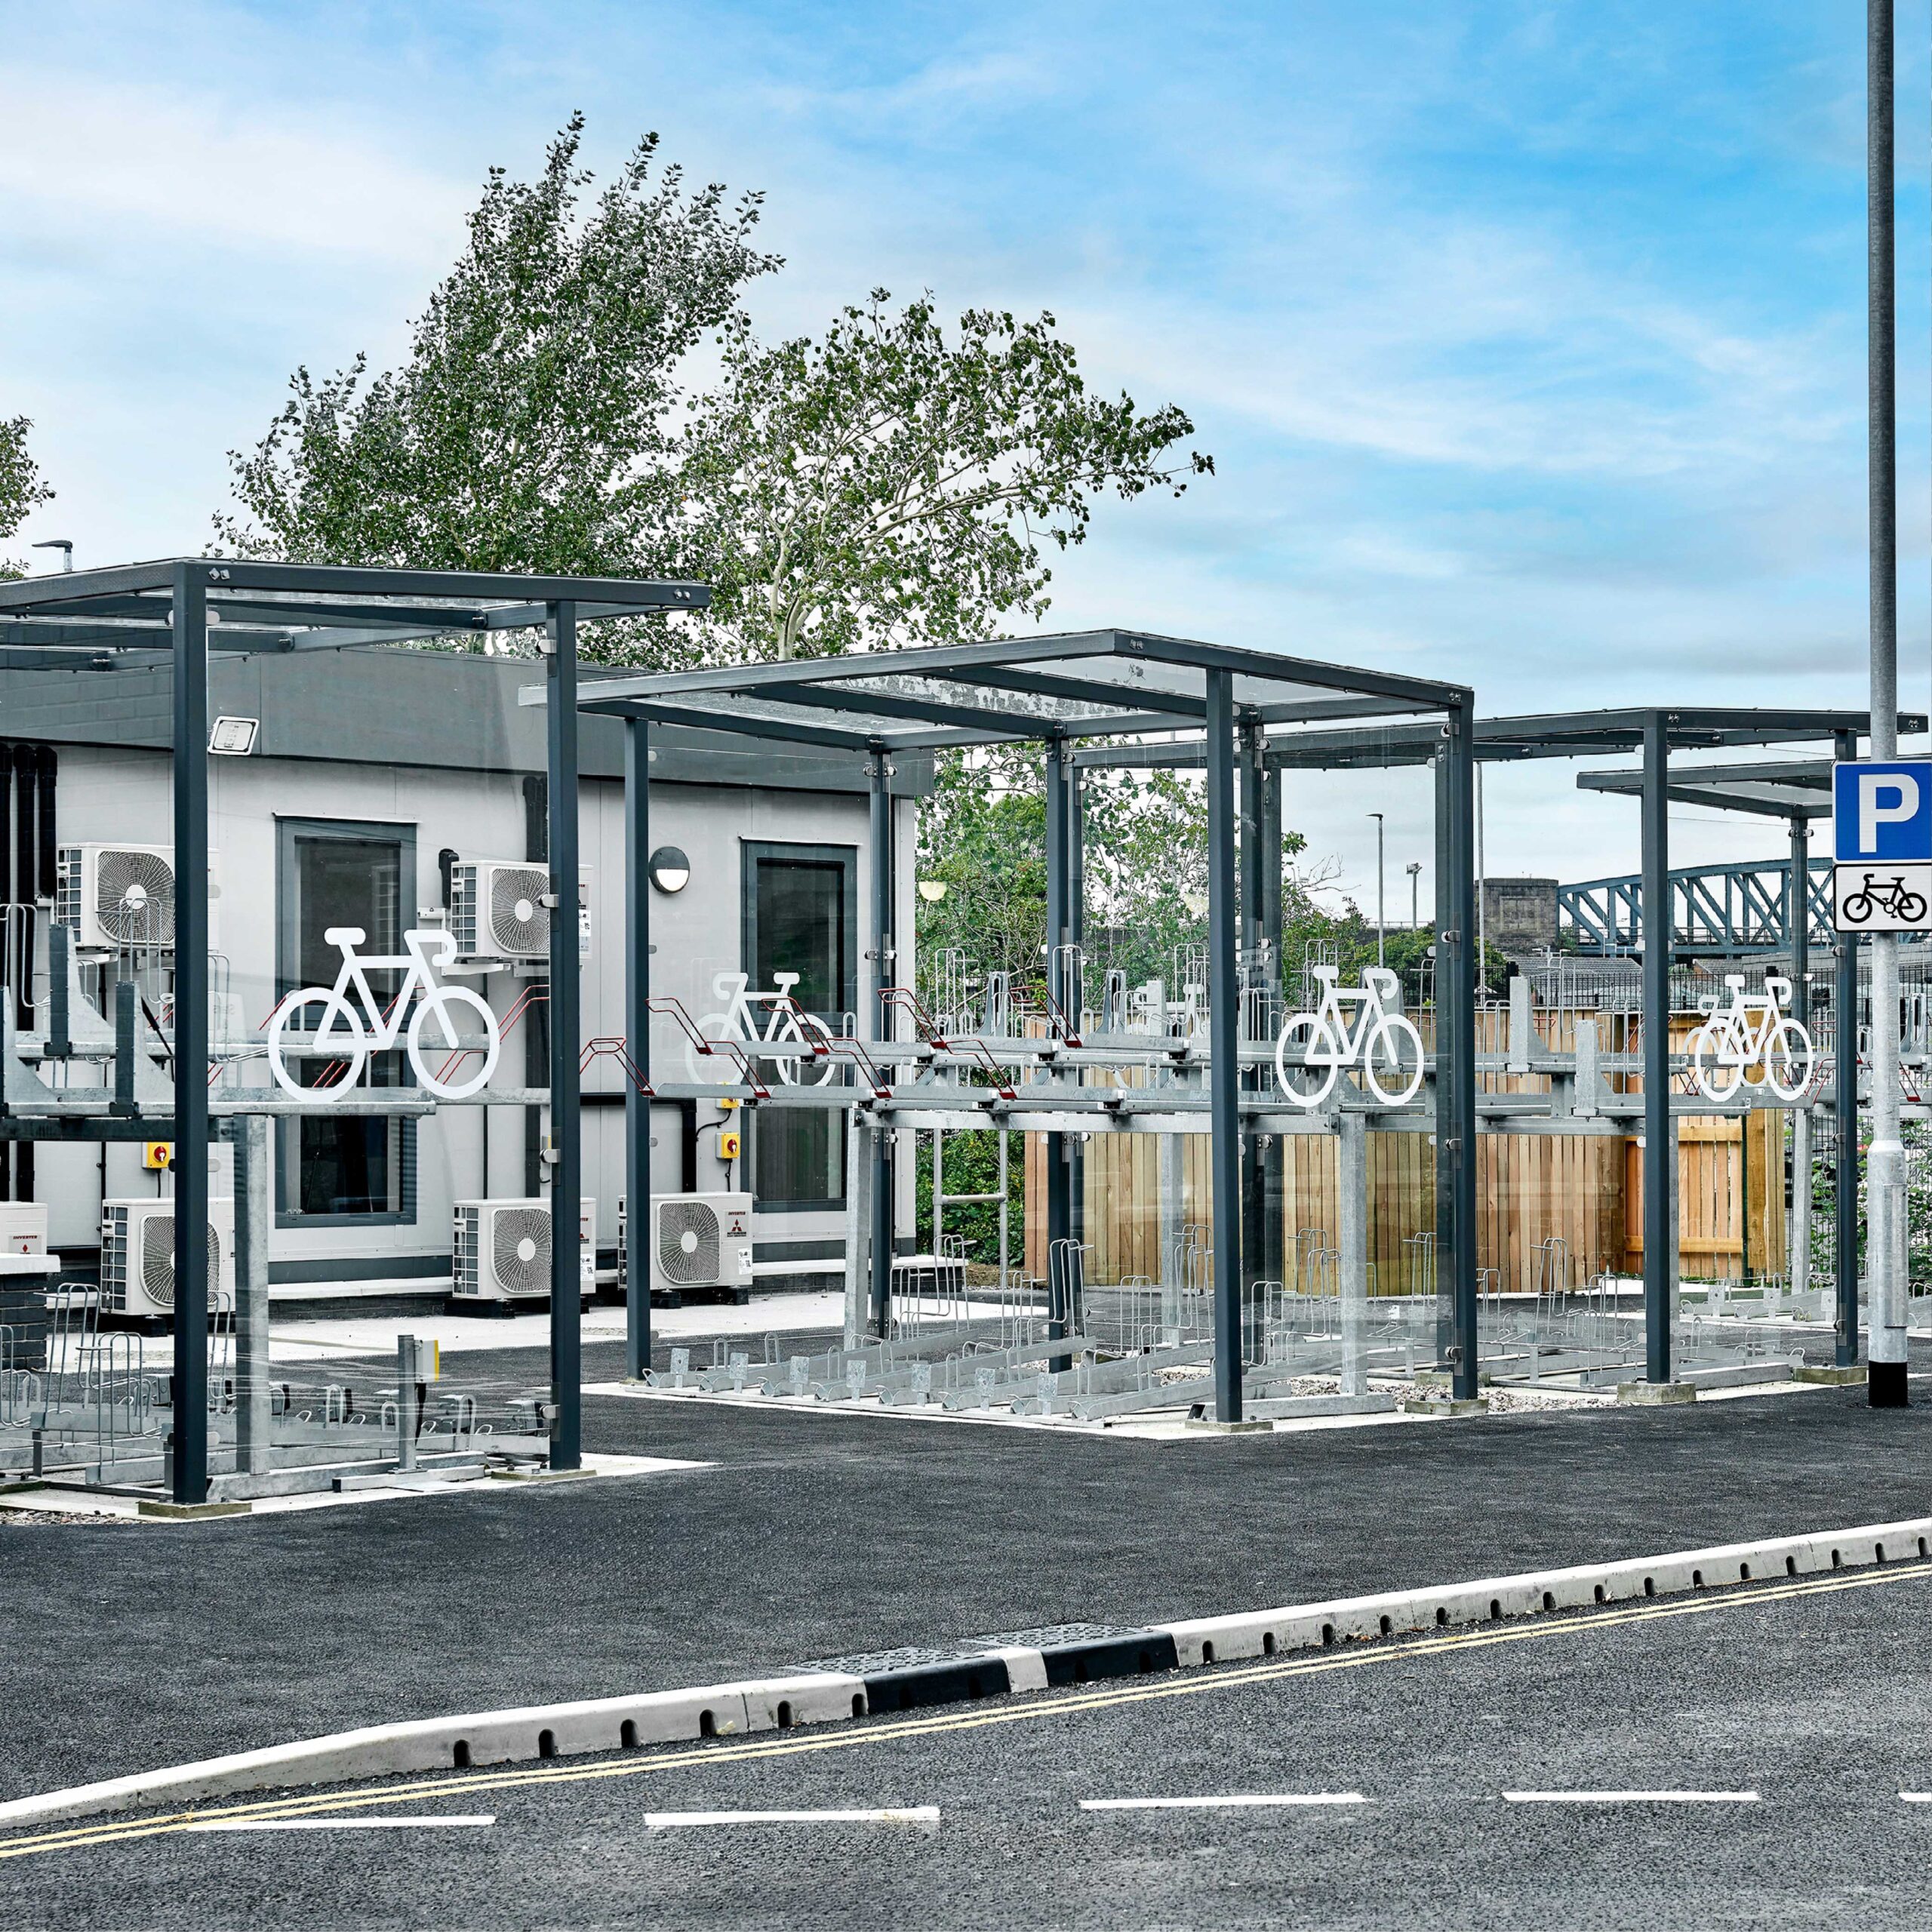 Modern bicycle parking facility with covered bike racks and secured bicycle stands beside a paved road and parking lot, under a clear sky.